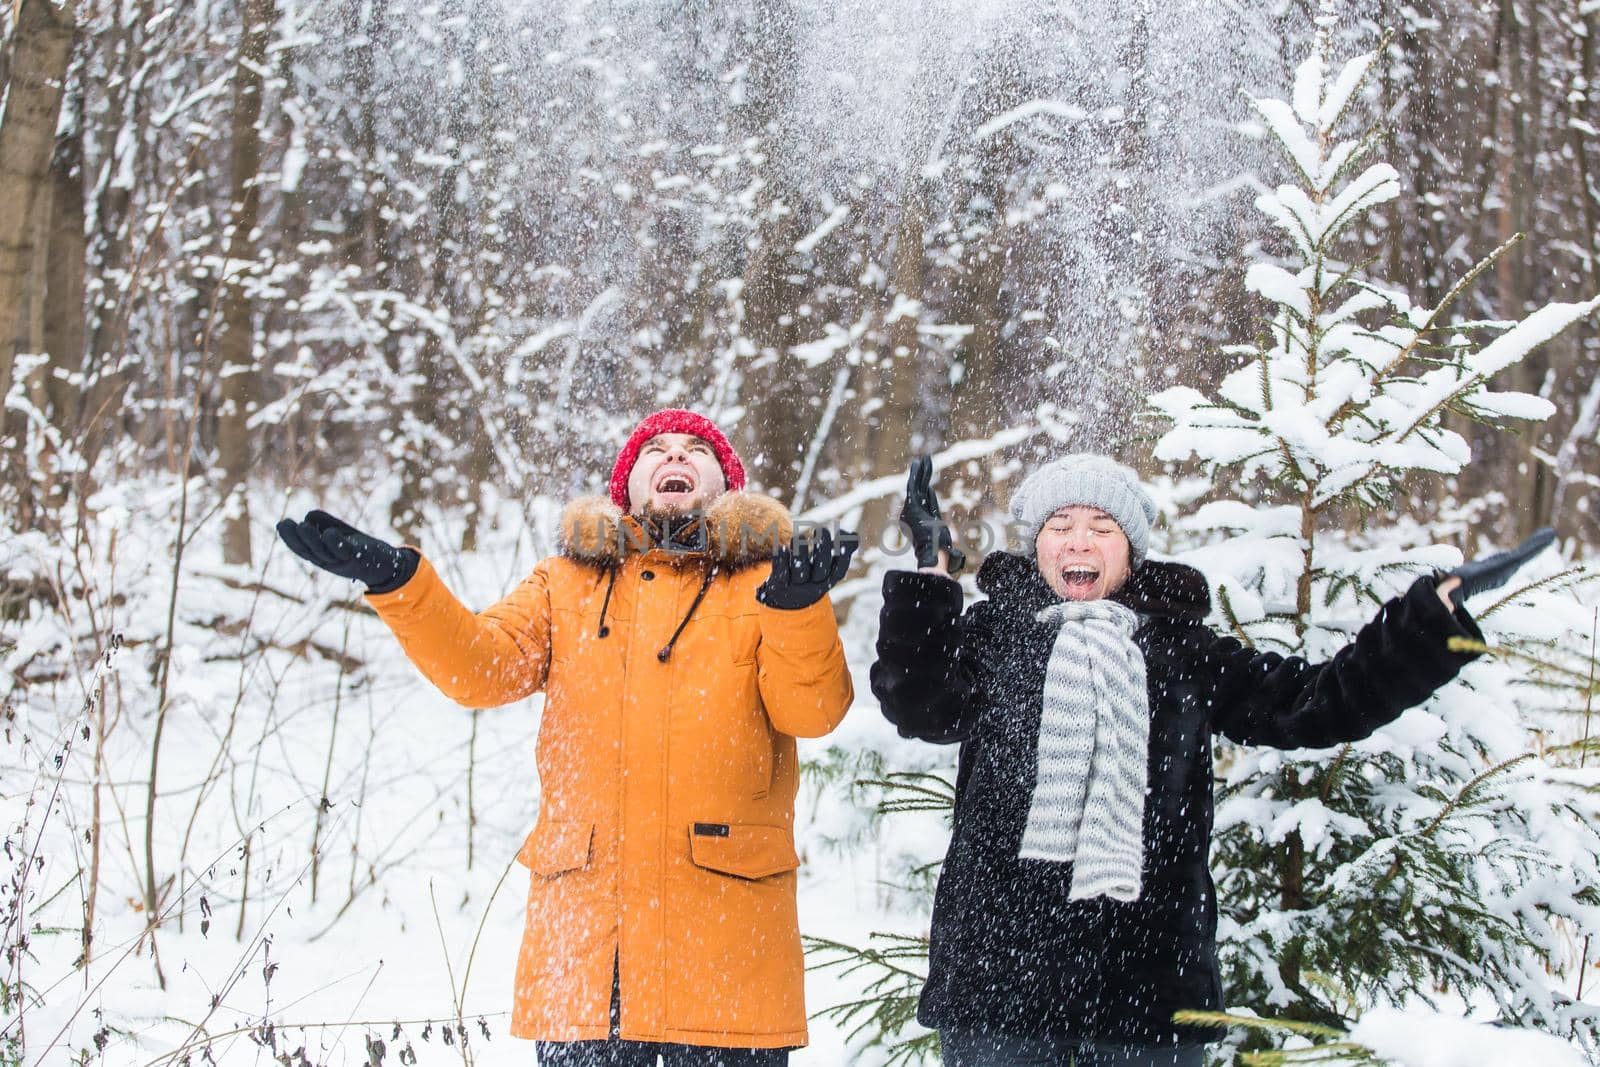 Love, season, friendship and people concept - happy young man and woman having fun and playing with snow in winter forest.